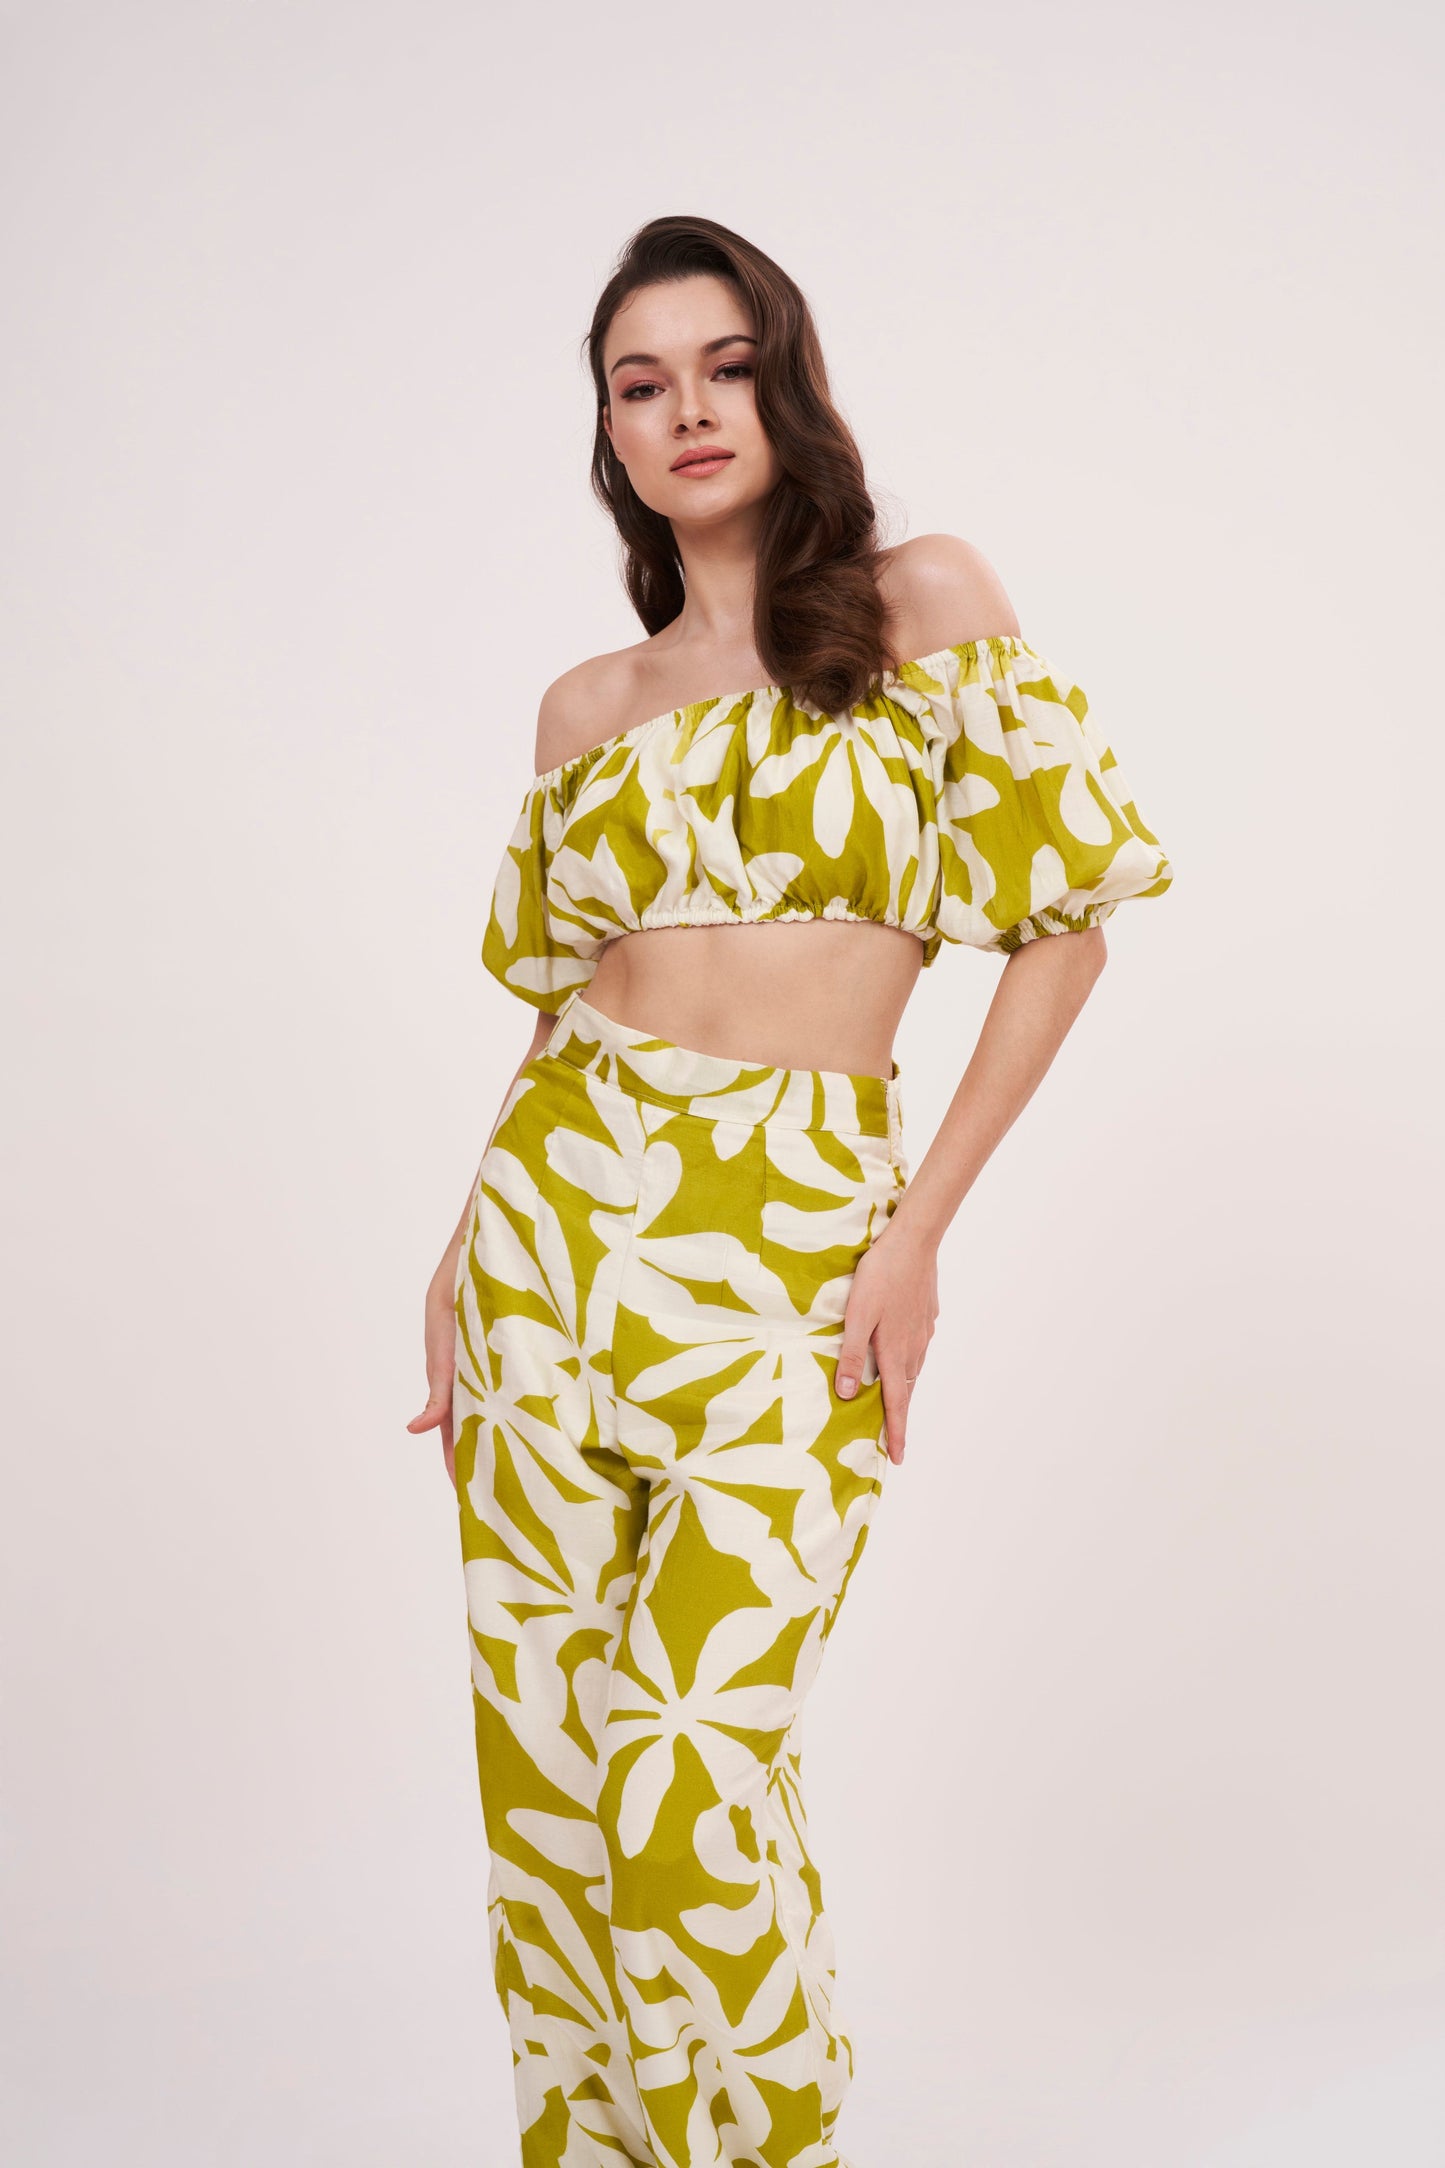 Elasticated-sleeve tube crop top with off-shoulder floral design, perfect for summer outings and casual evening dinners, featuring a green geometric print.